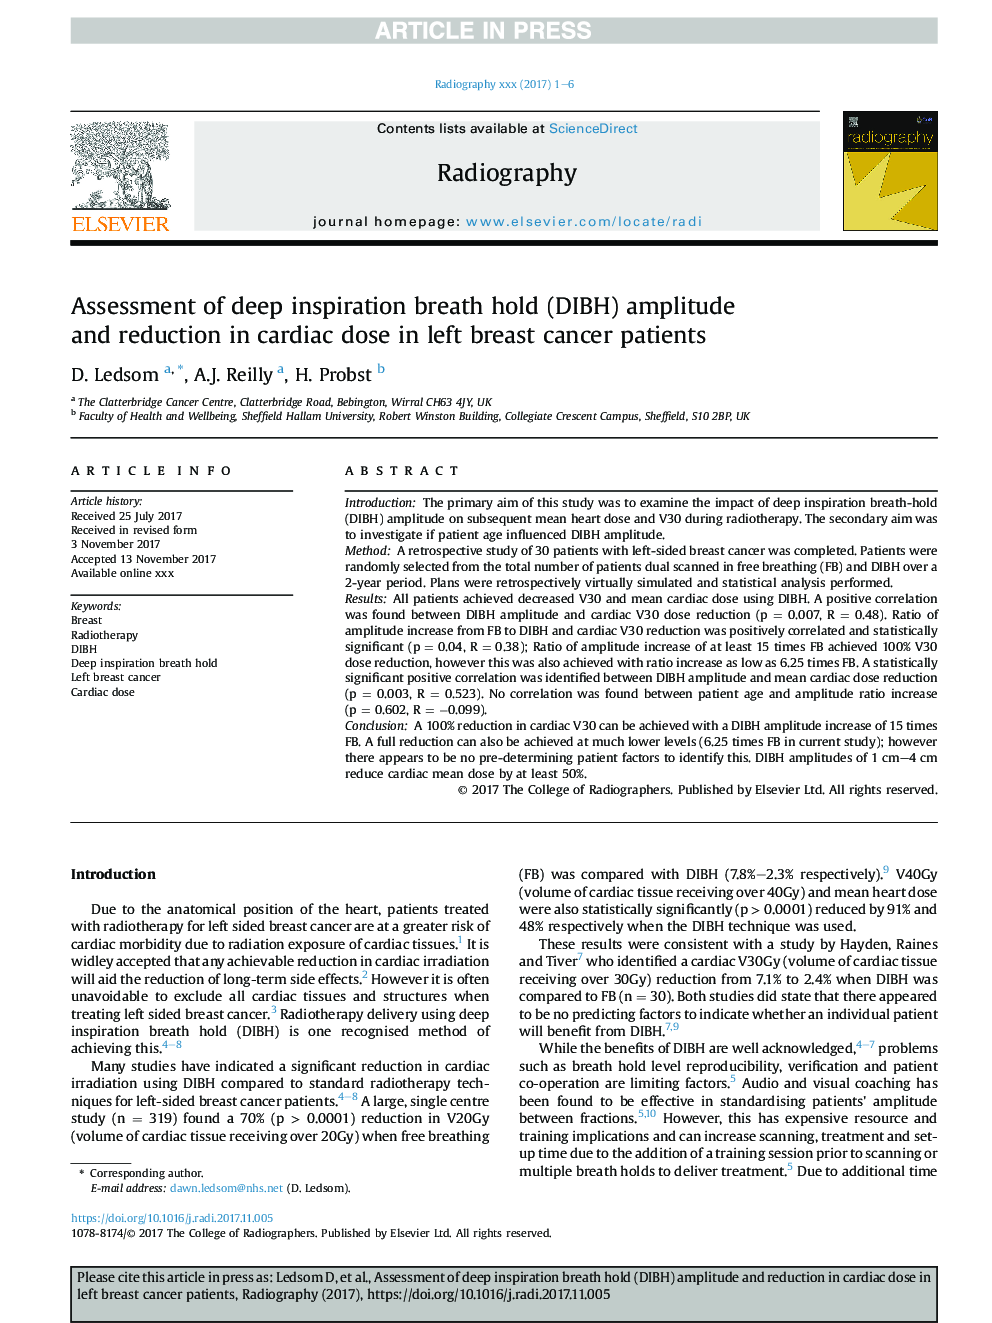 Assessment of deep inspiration breath hold (DIBH) amplitude and reduction in cardiac dose in left breast cancer patients